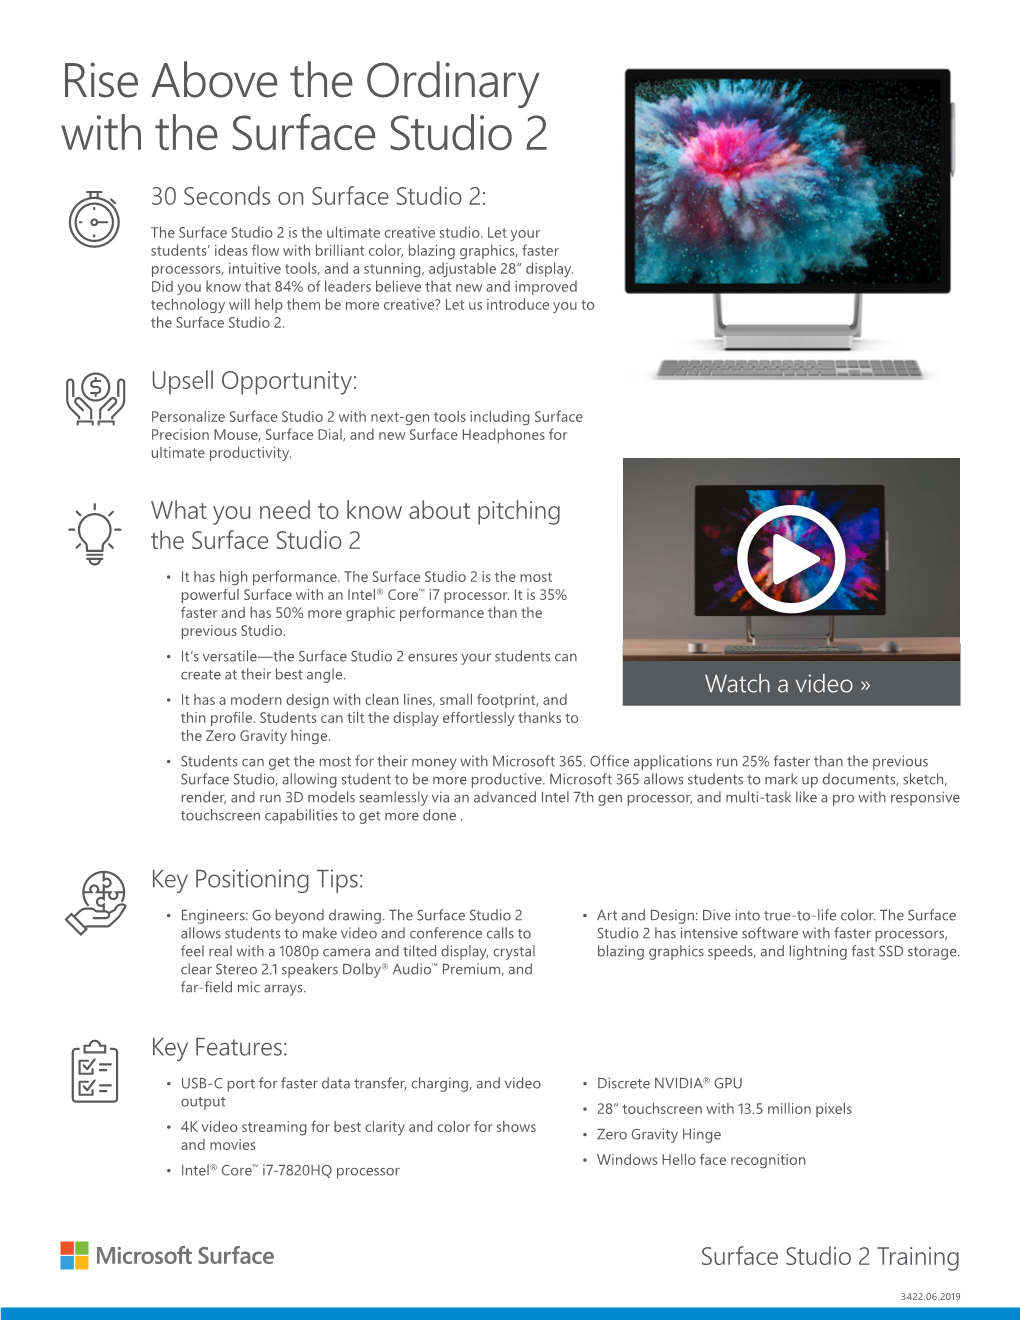 Rise Above the Ordinary with the Surface Studio 2 30 Seconds on Surface Studio 2